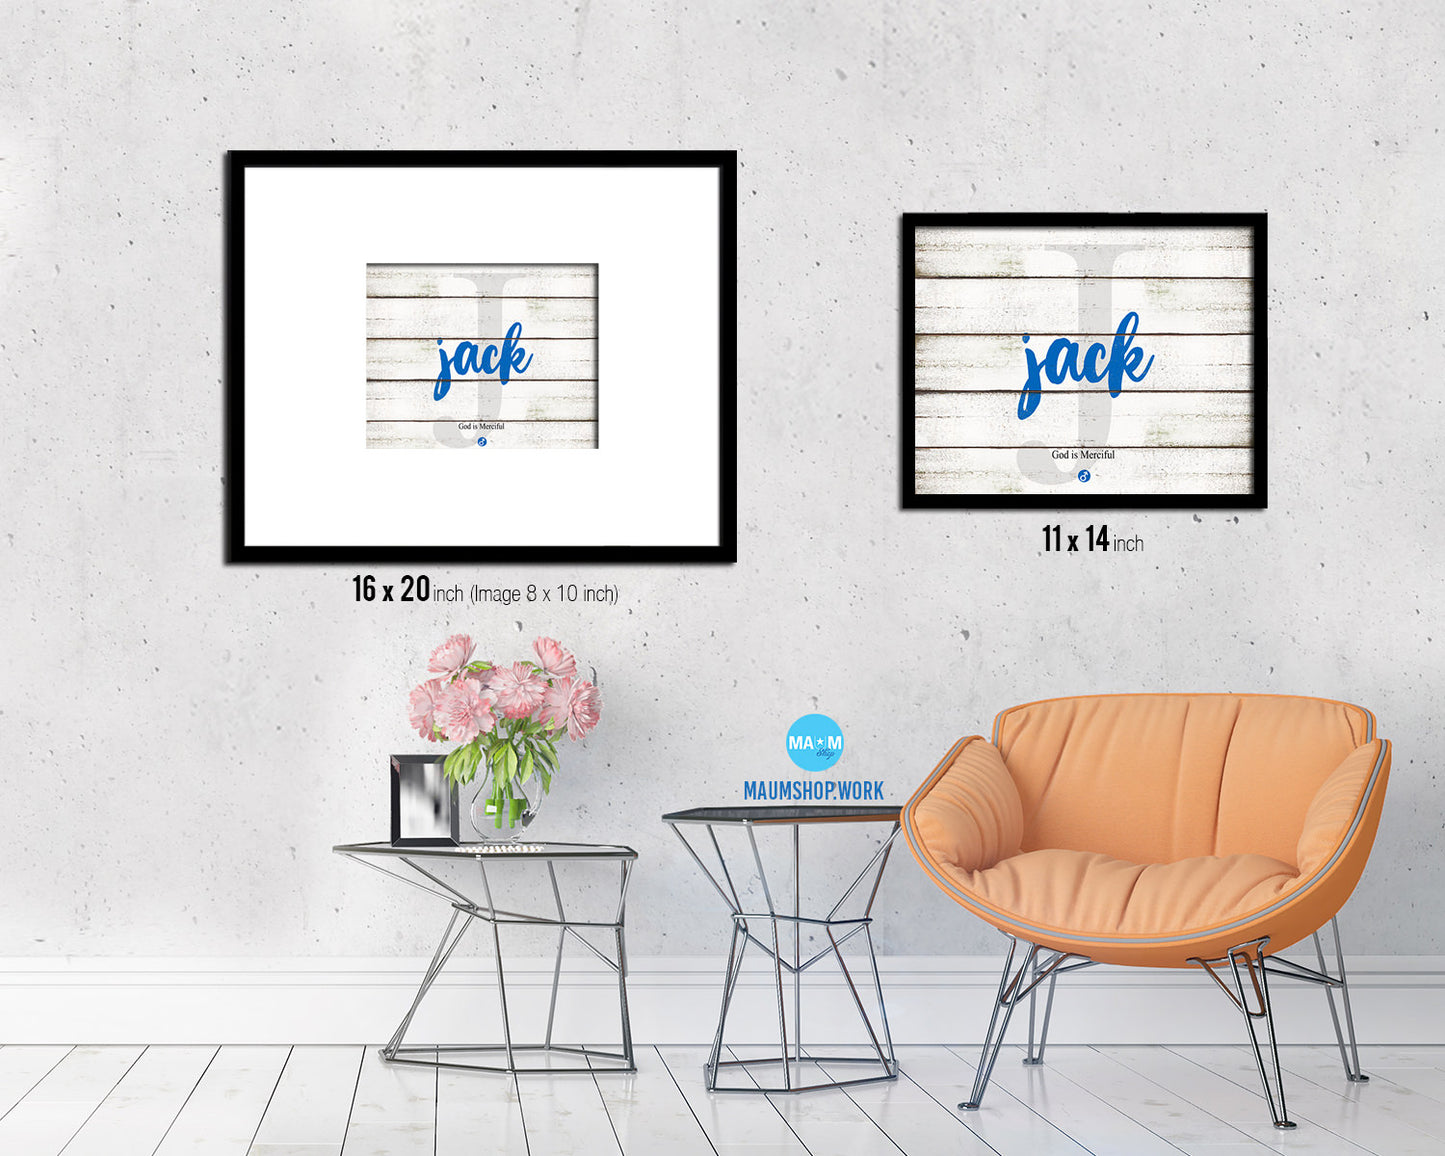 Jack Personalized Biblical Name Plate Art Framed Print Kids Baby Room Wall Decor Gifts